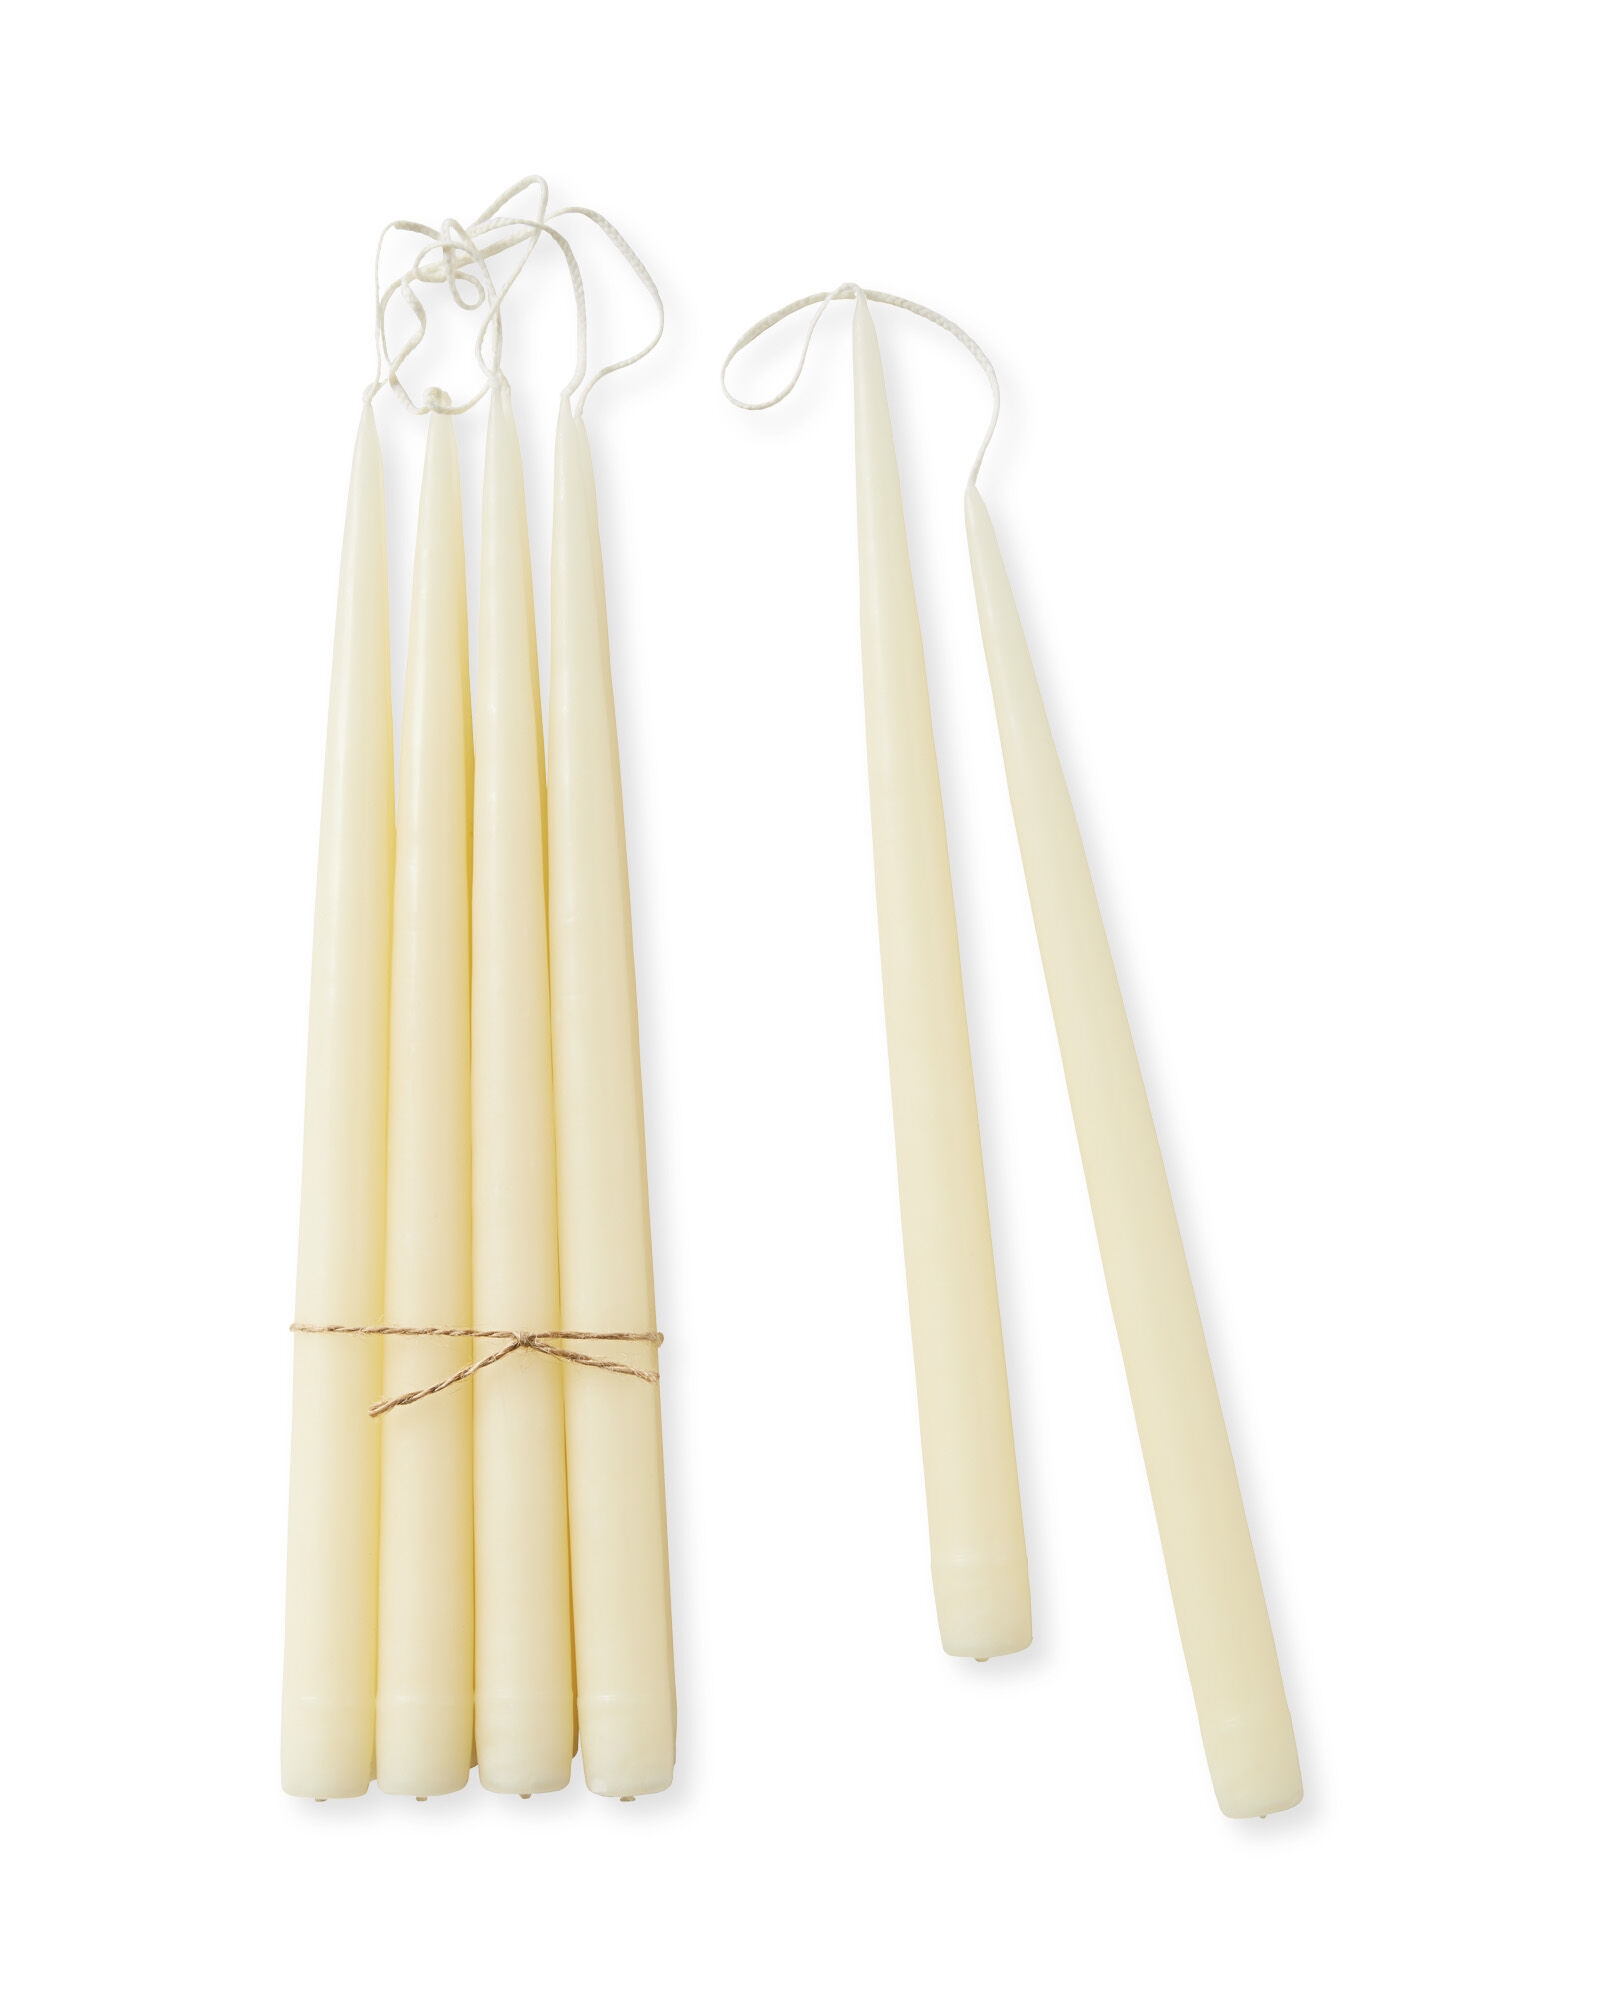 Tapered Candles (Set of 10) - Image 0